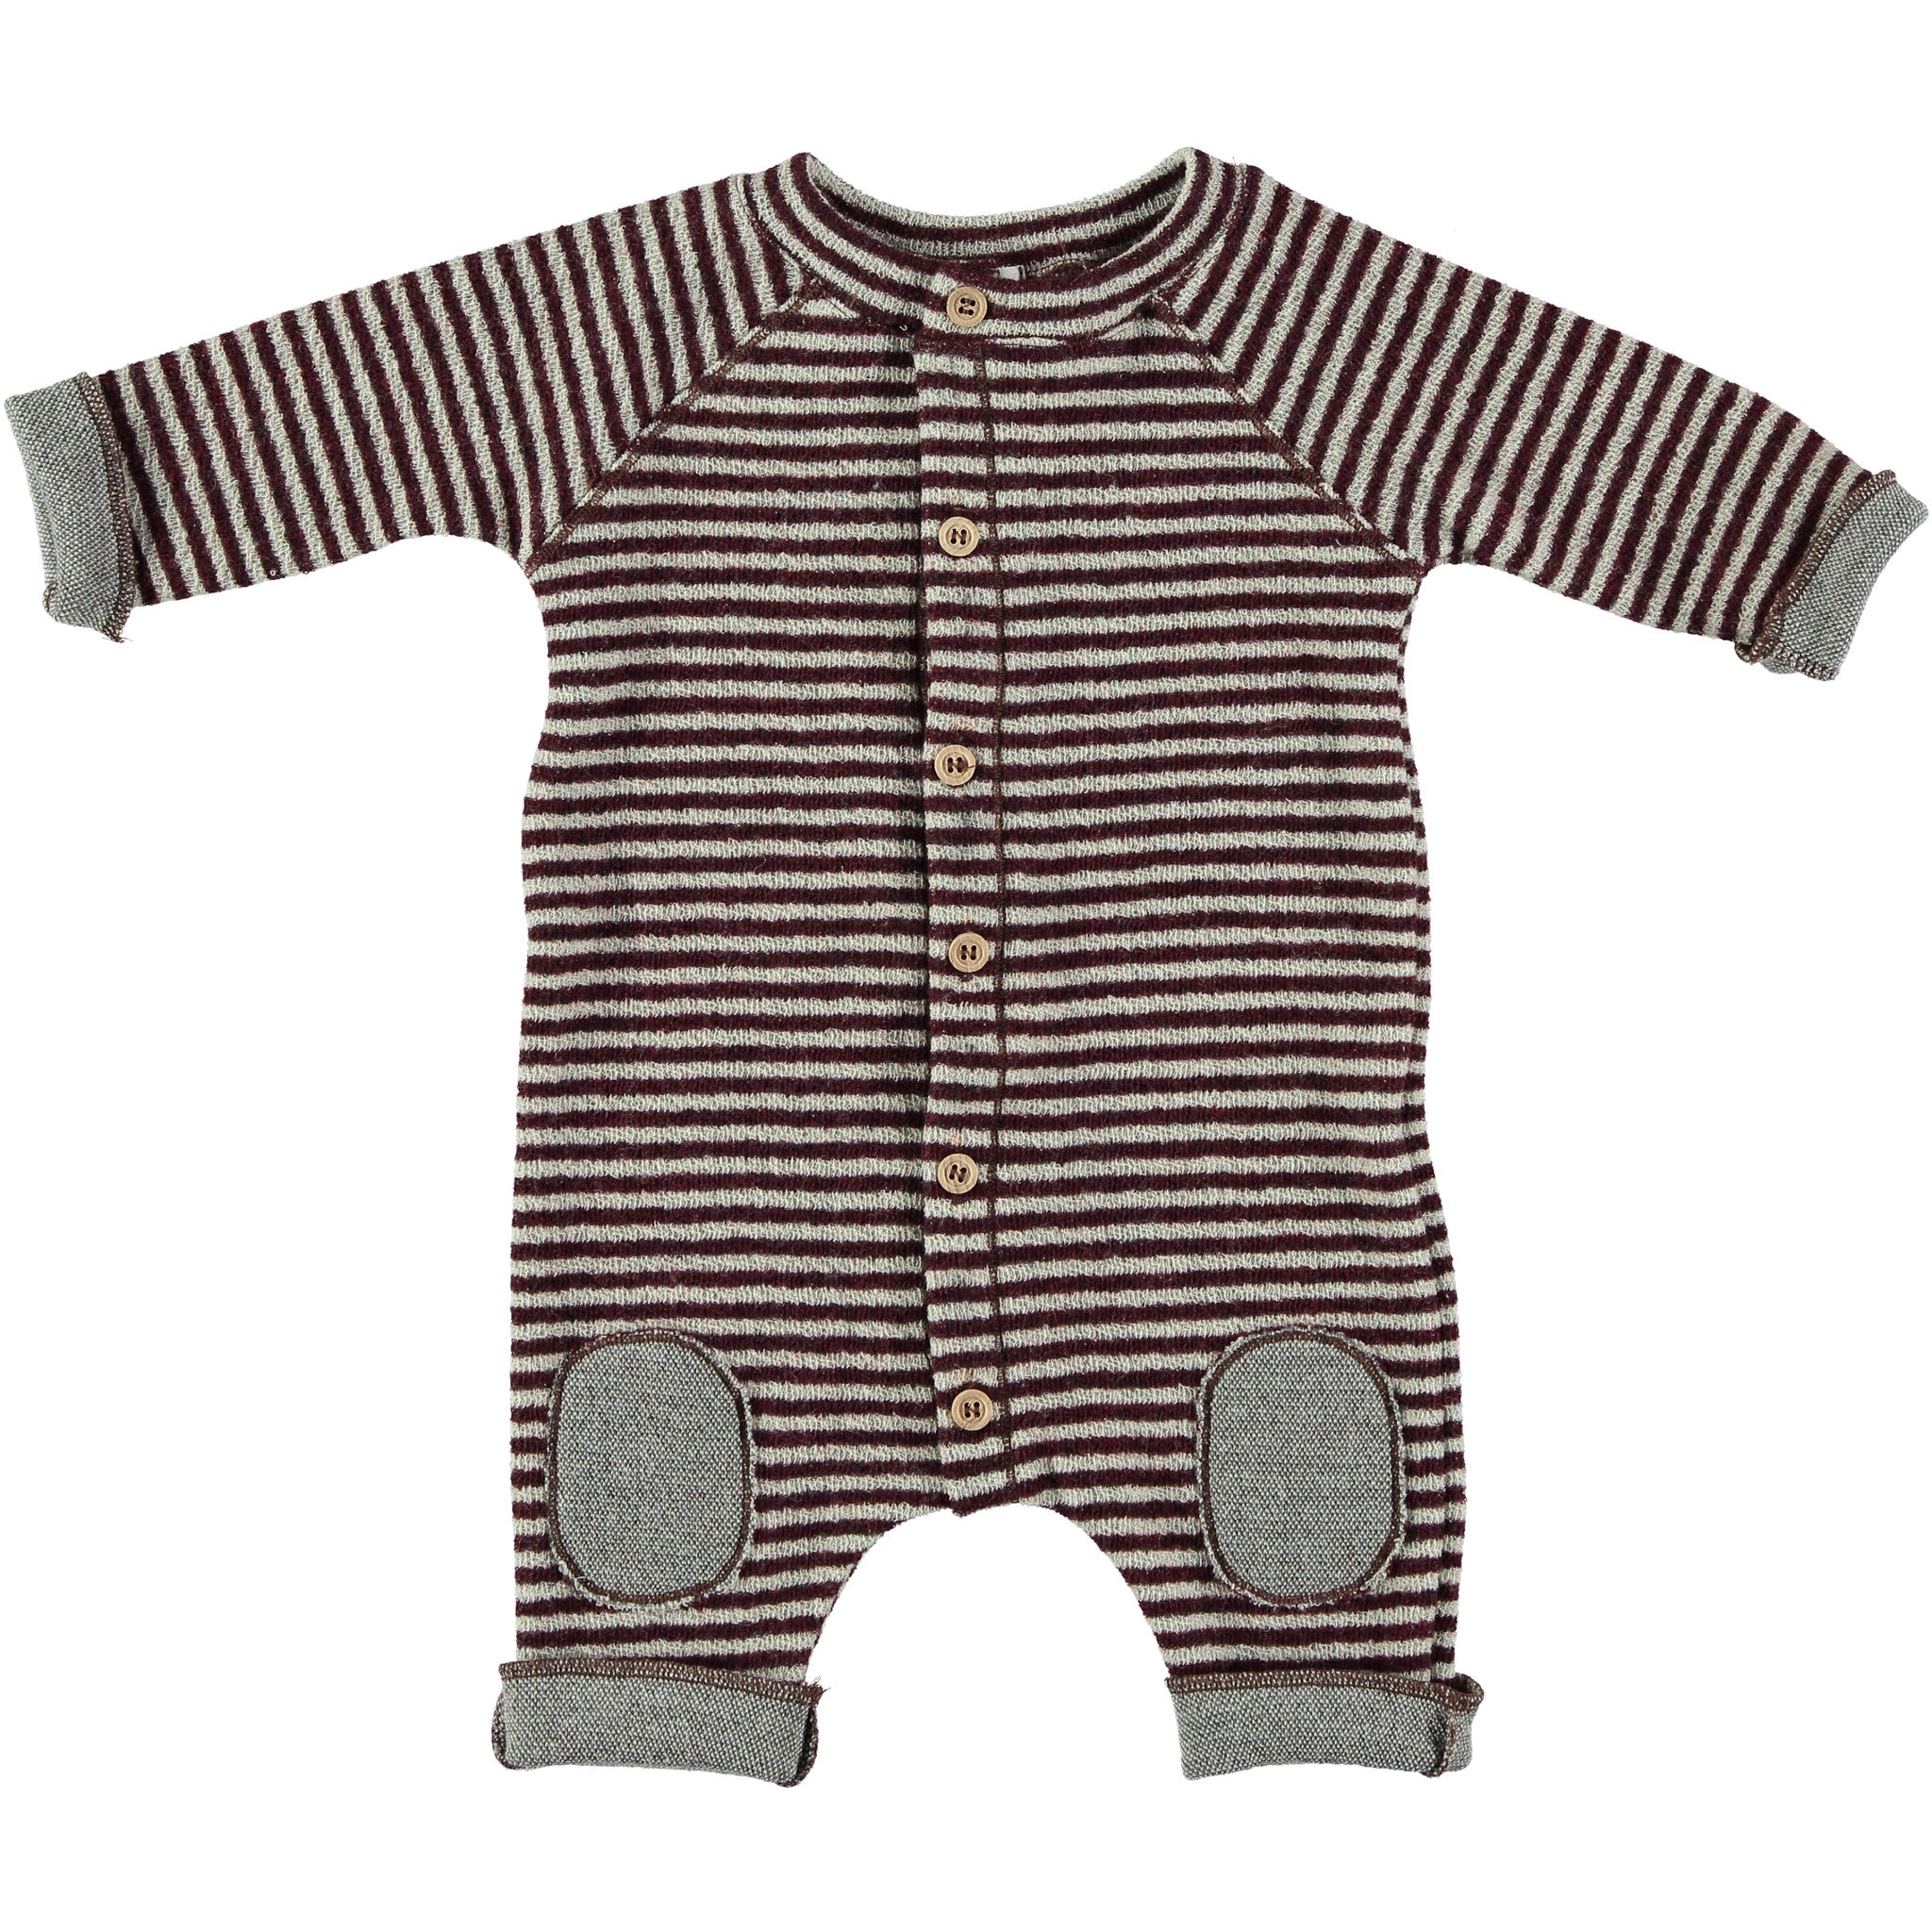 Striped Baby romper by Buho at Bonjour Baby Baskets